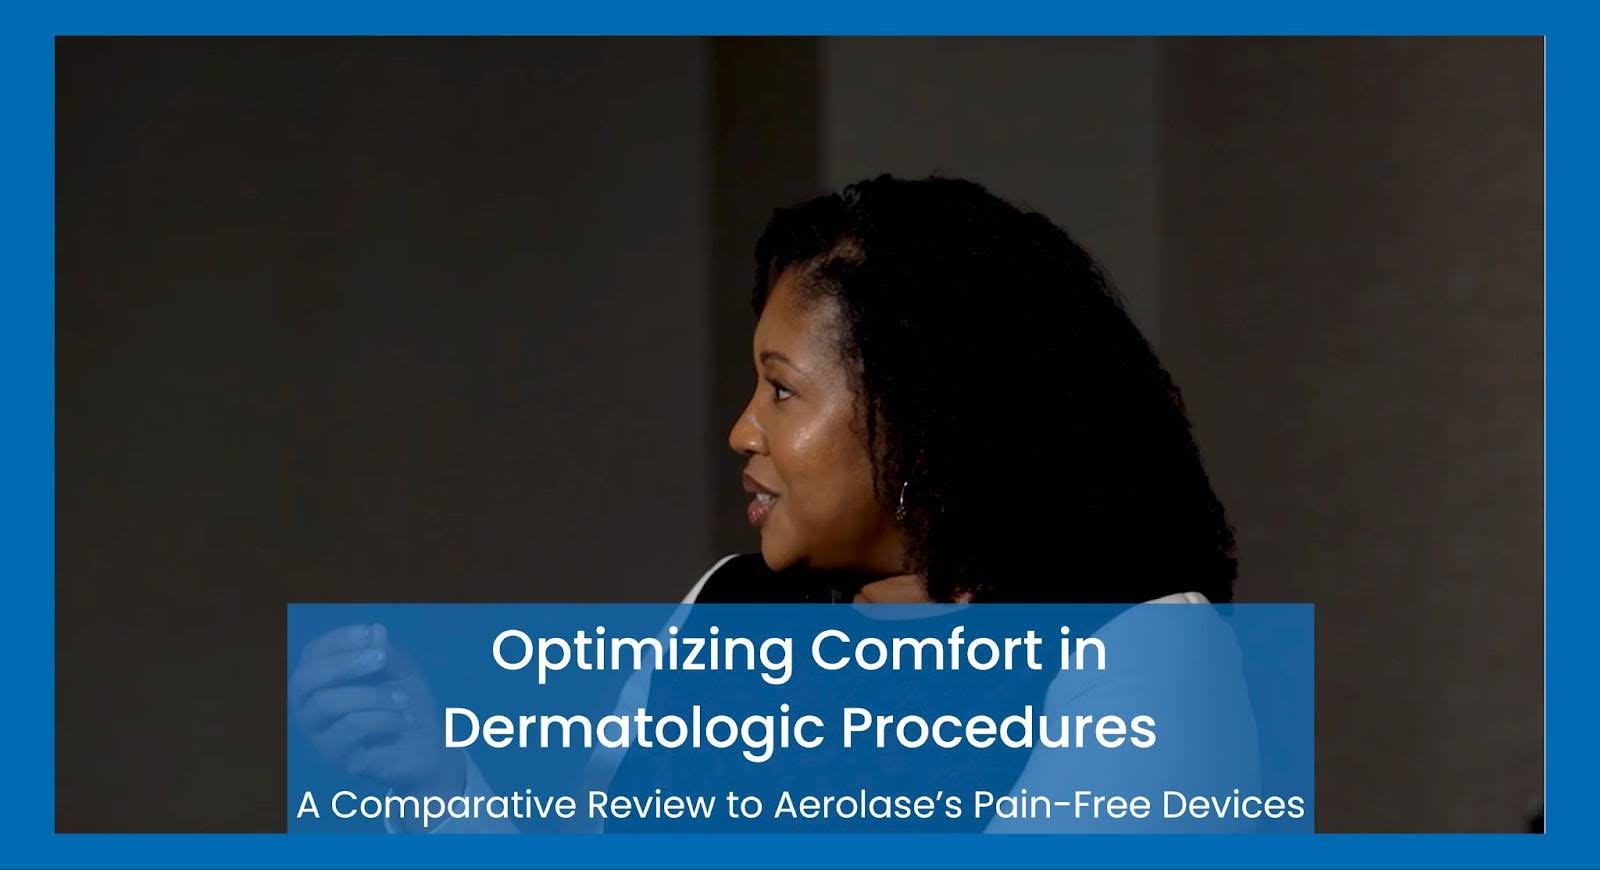 Optimizing Comfort in Dermatologic Procedures: A Comparative Review to Aerolase’s Pain-Free Devices